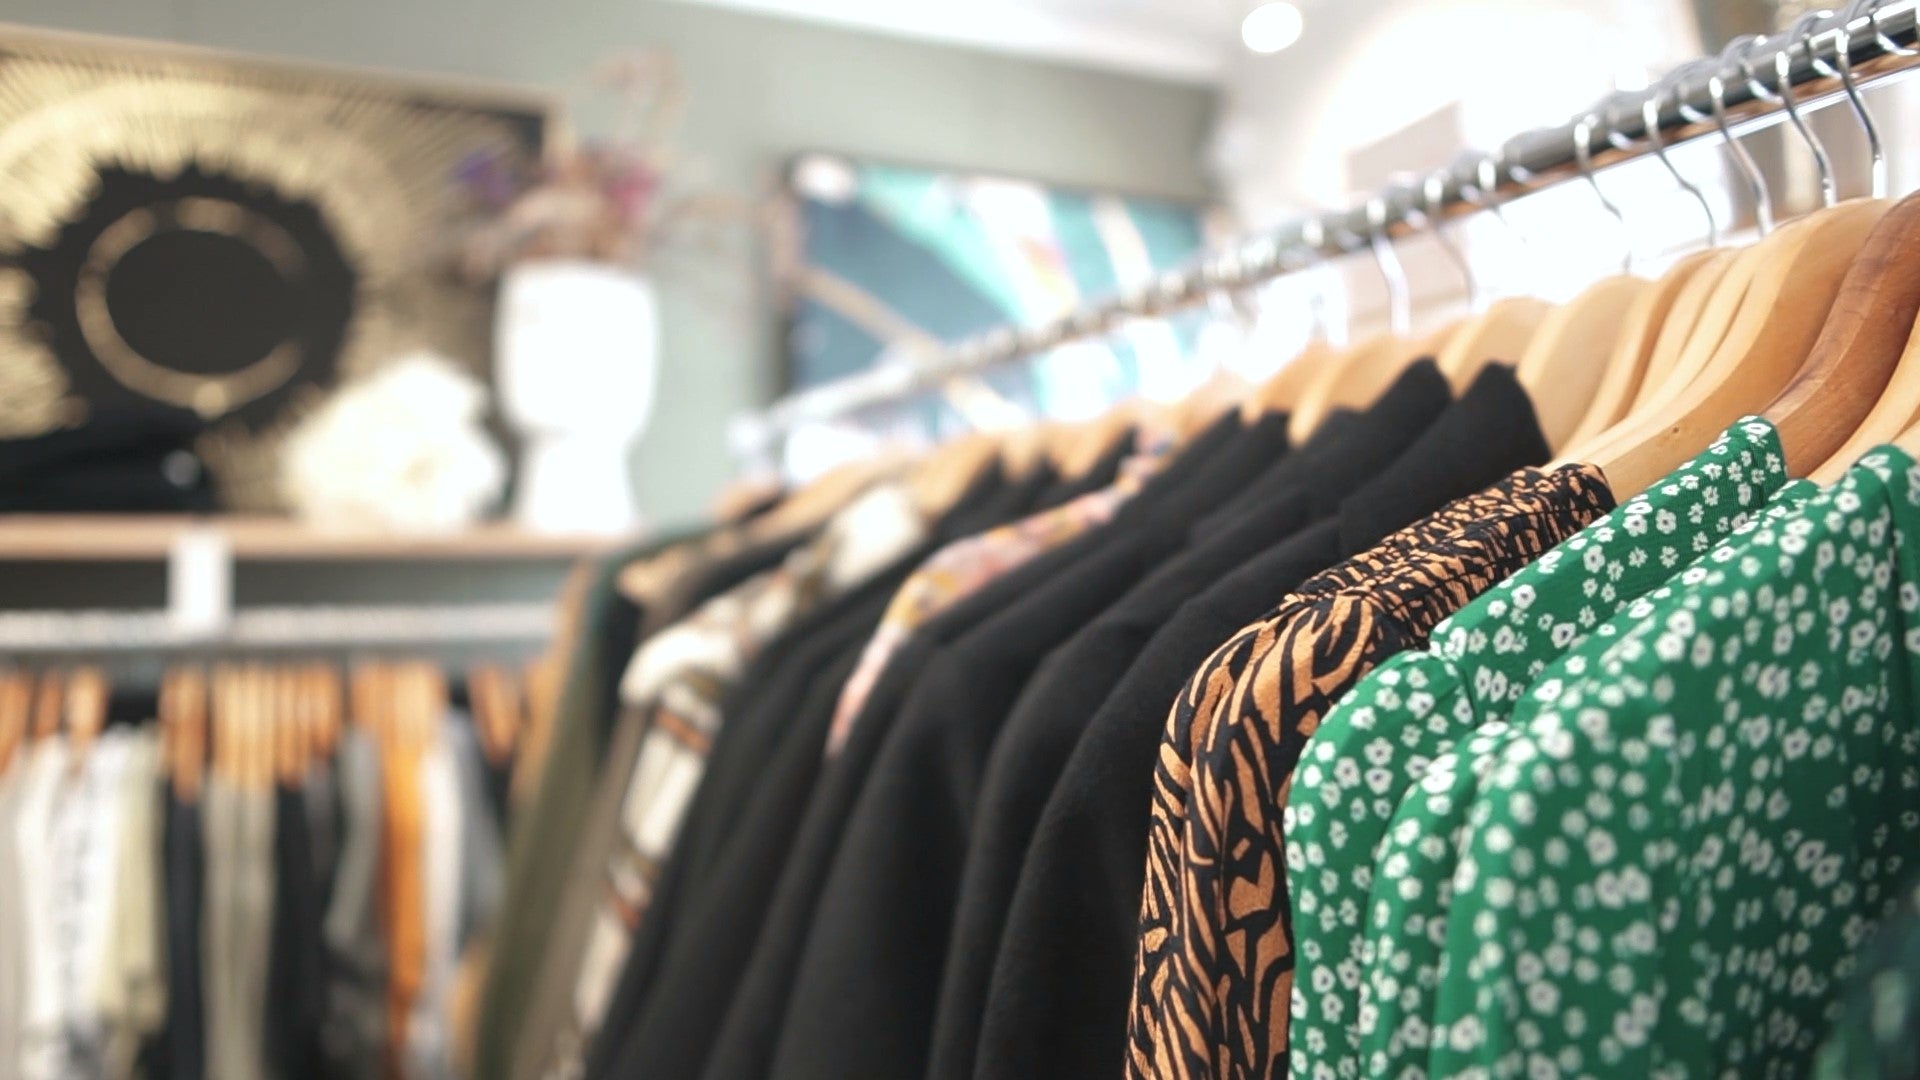 Load video: Take a tour inside our store